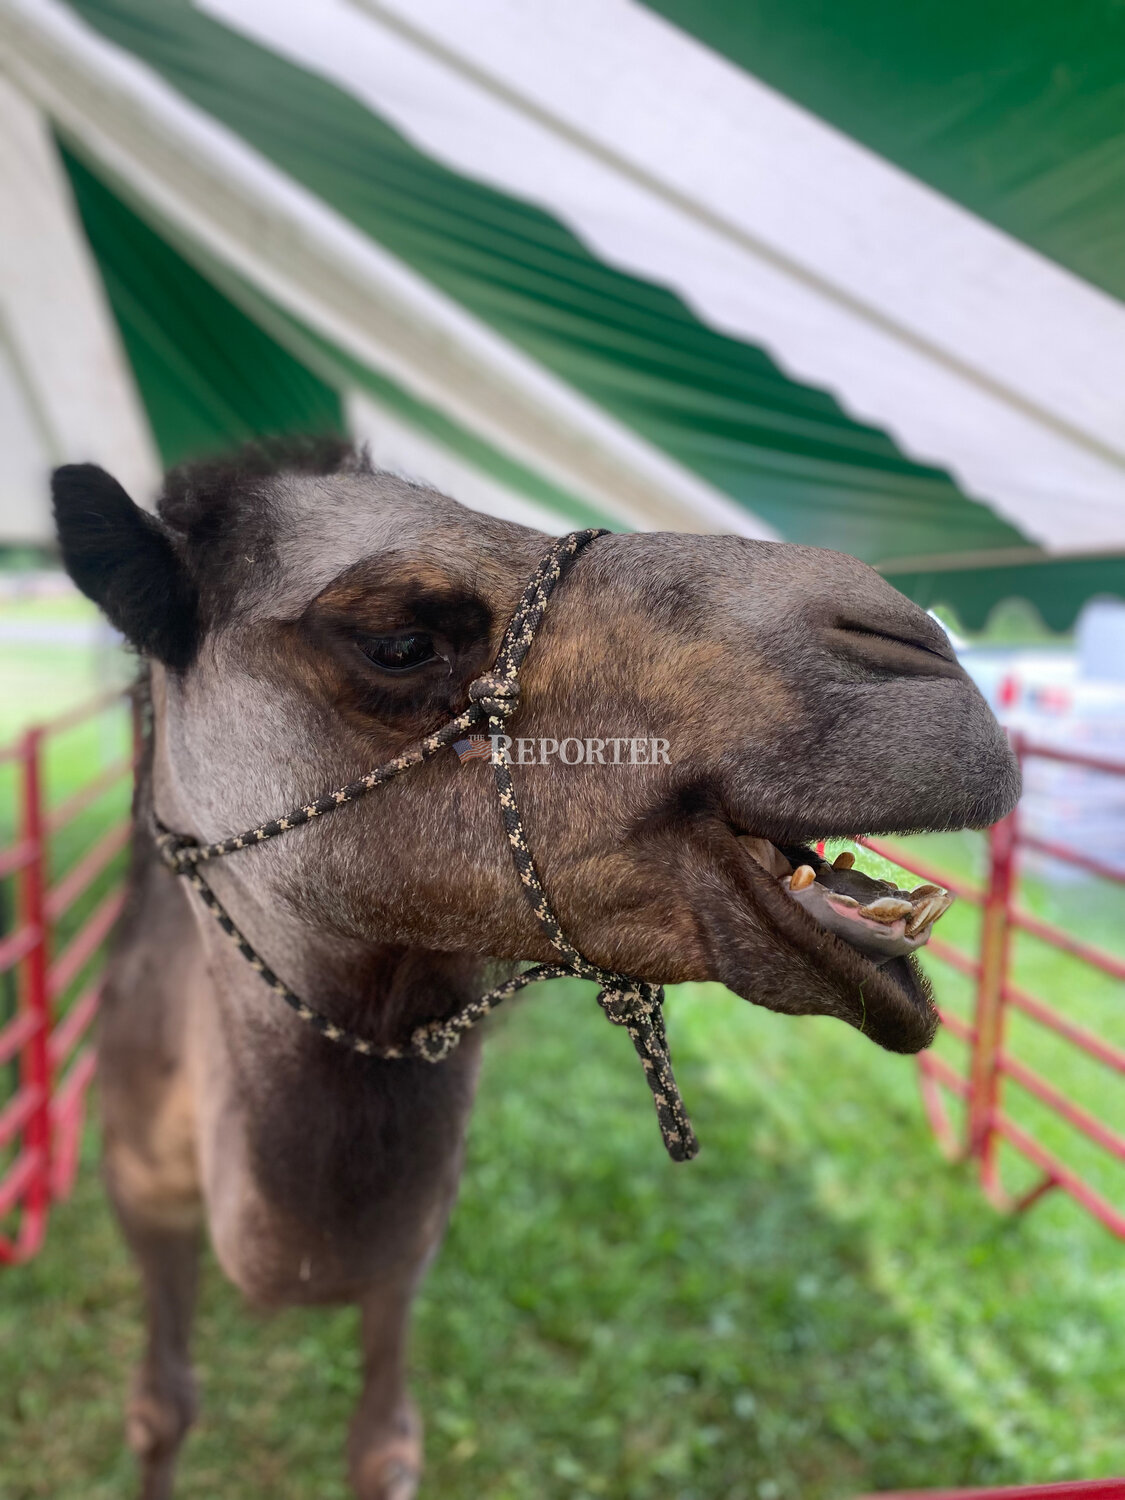 “Chewy” the camel, short for Chewbacca of Star Wars fame, was one of the exotic animals on display at the 136th annual Delaware County Fair.